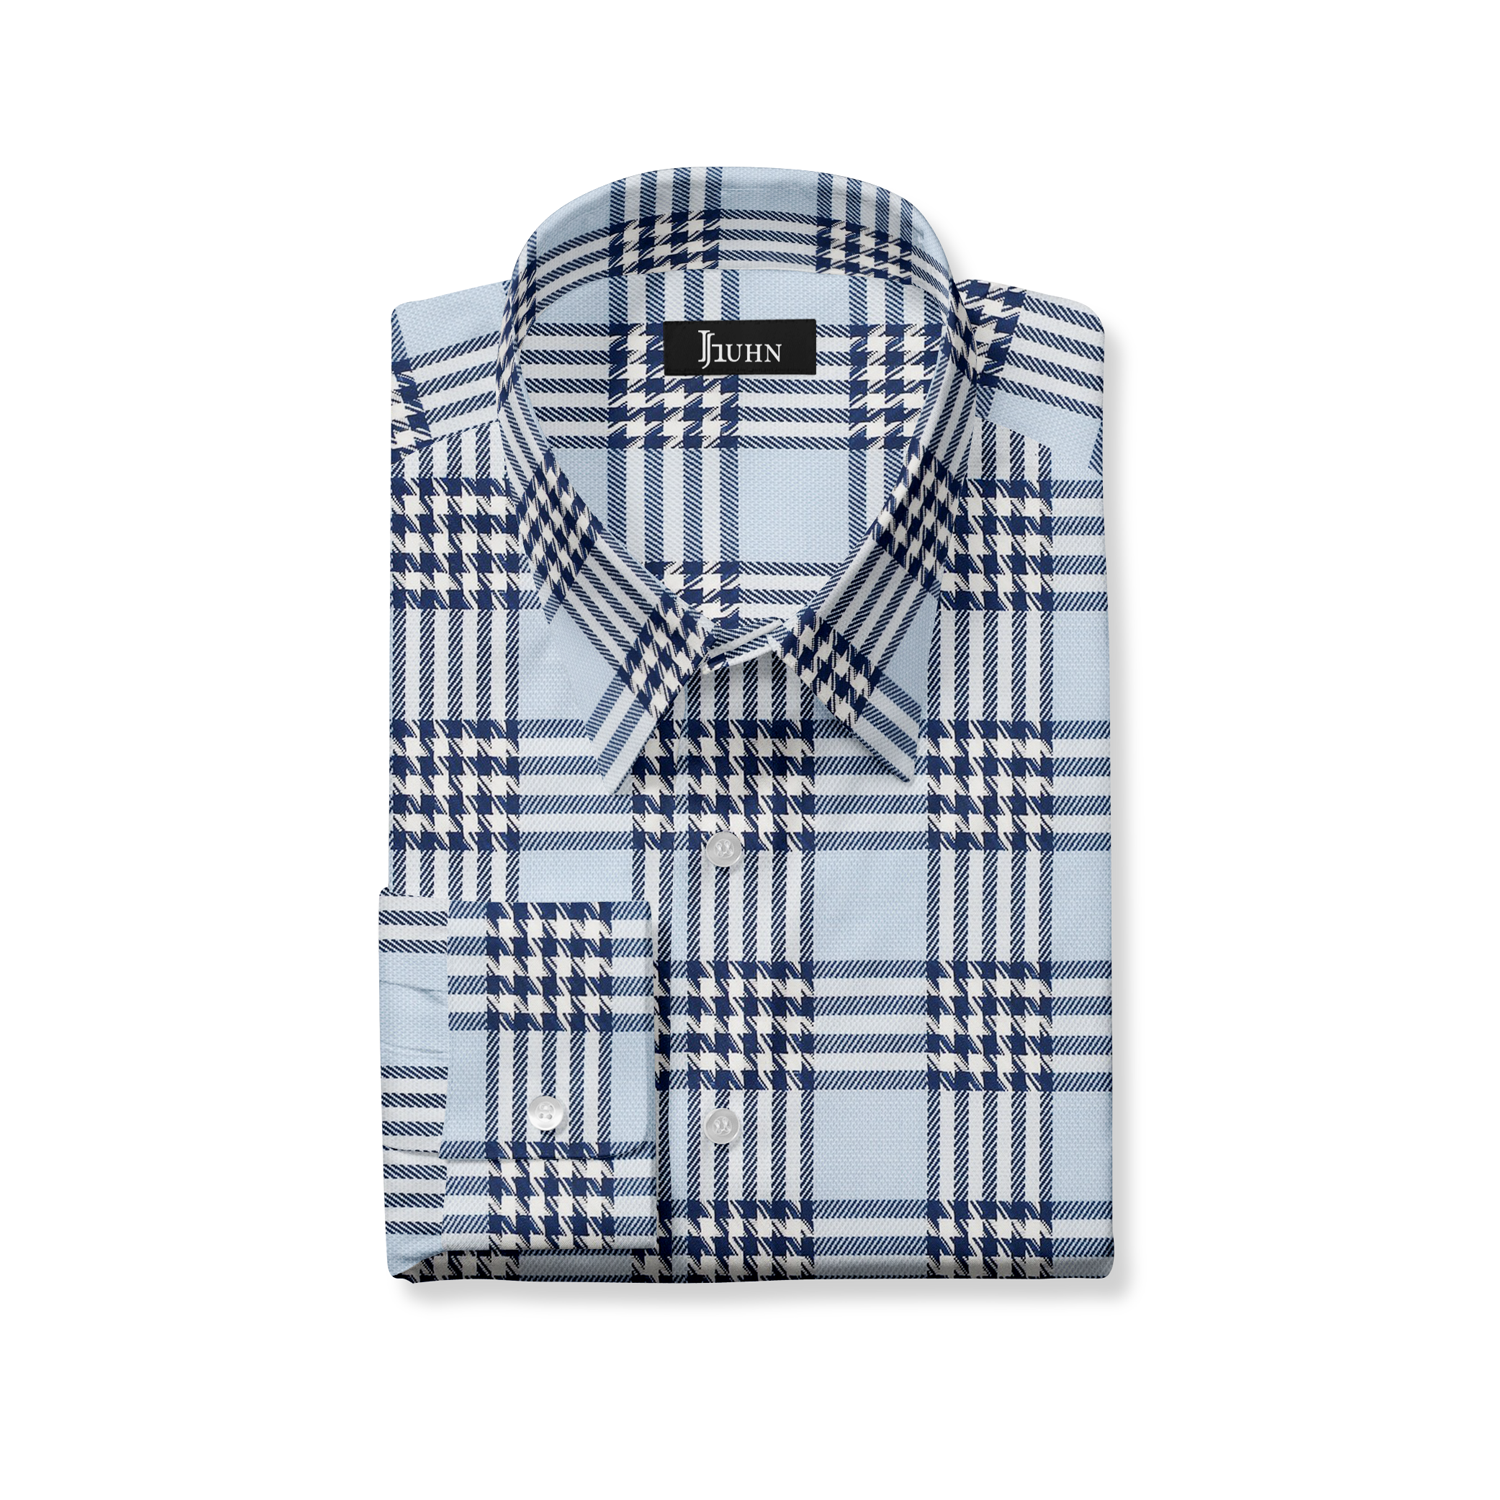 TGIF Men's Shirt in Blue on Blue Houndstooth Plaid